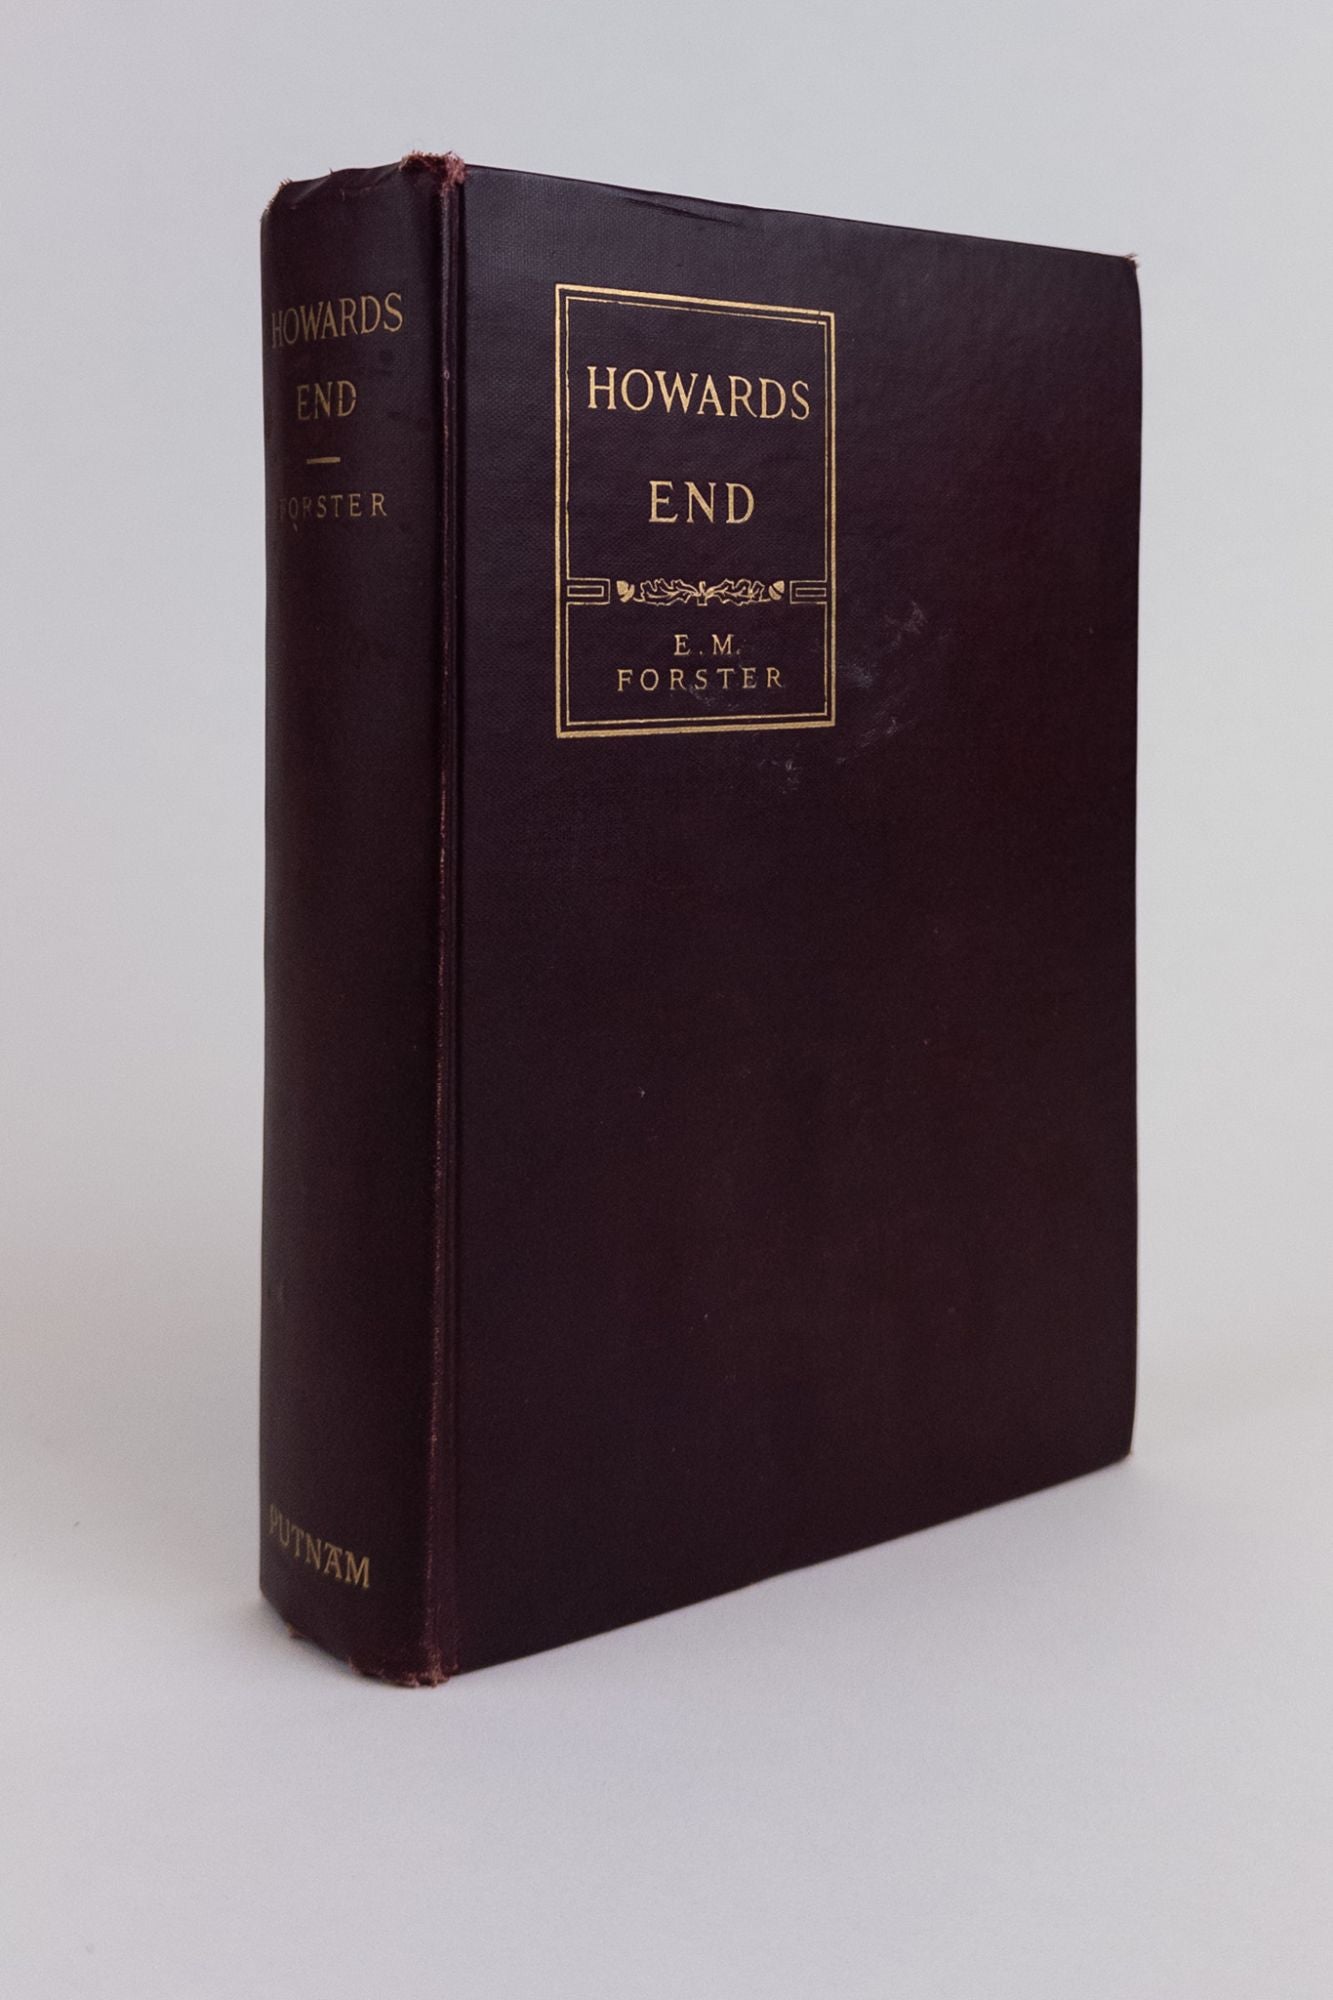 Product Image for HOWARD'S END